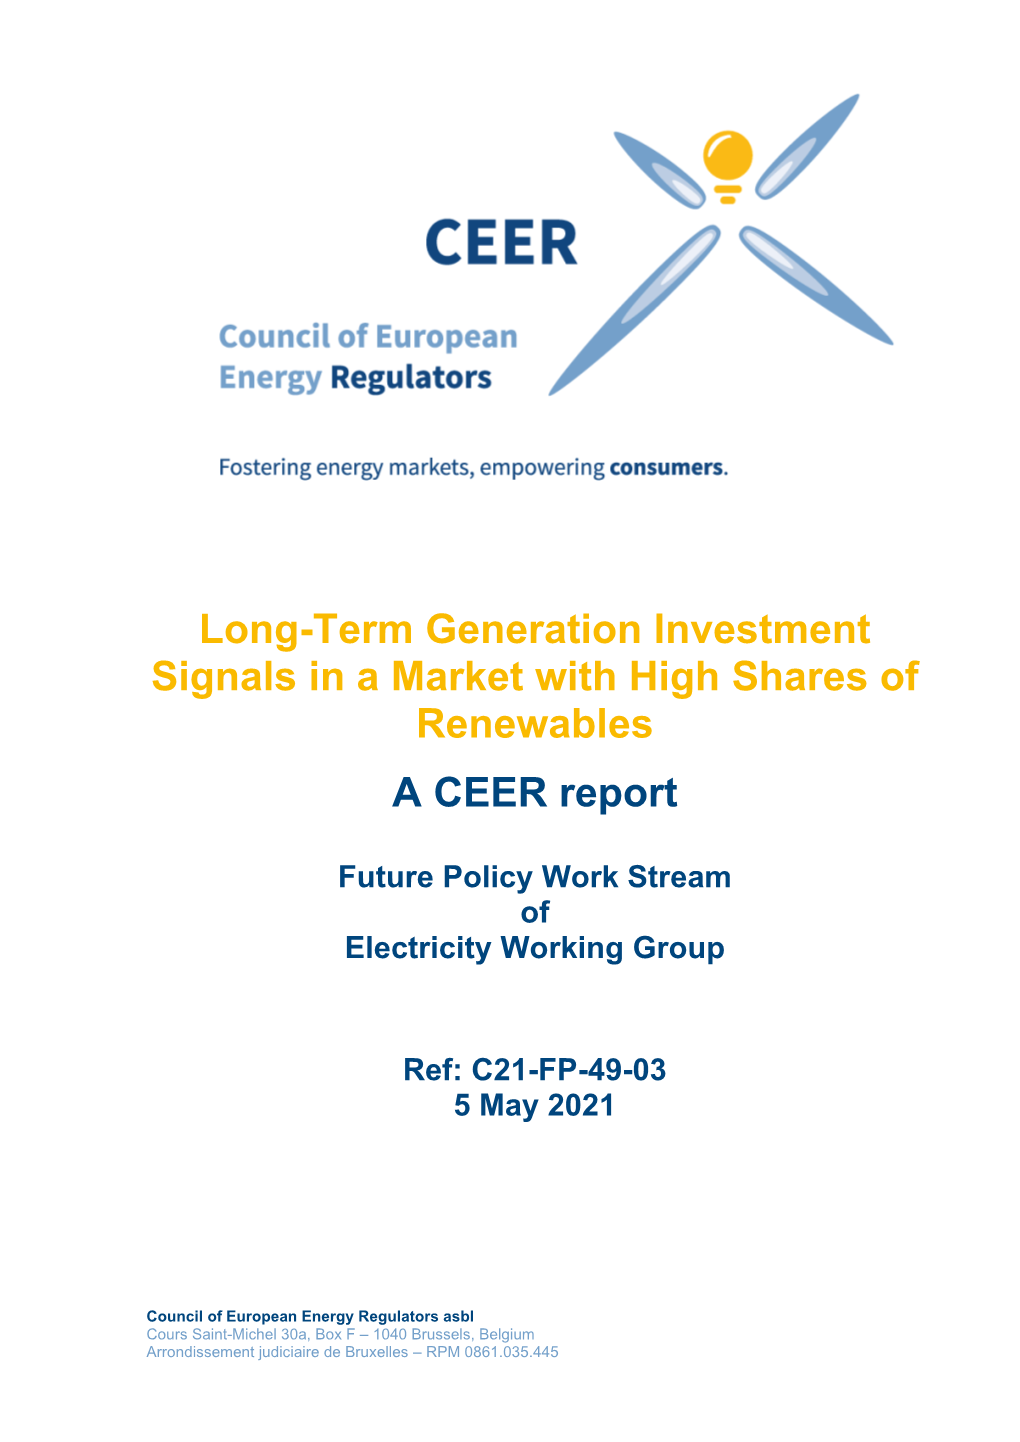 Long-Term Generation Investment Signals in a Market with High Shares of Renewables